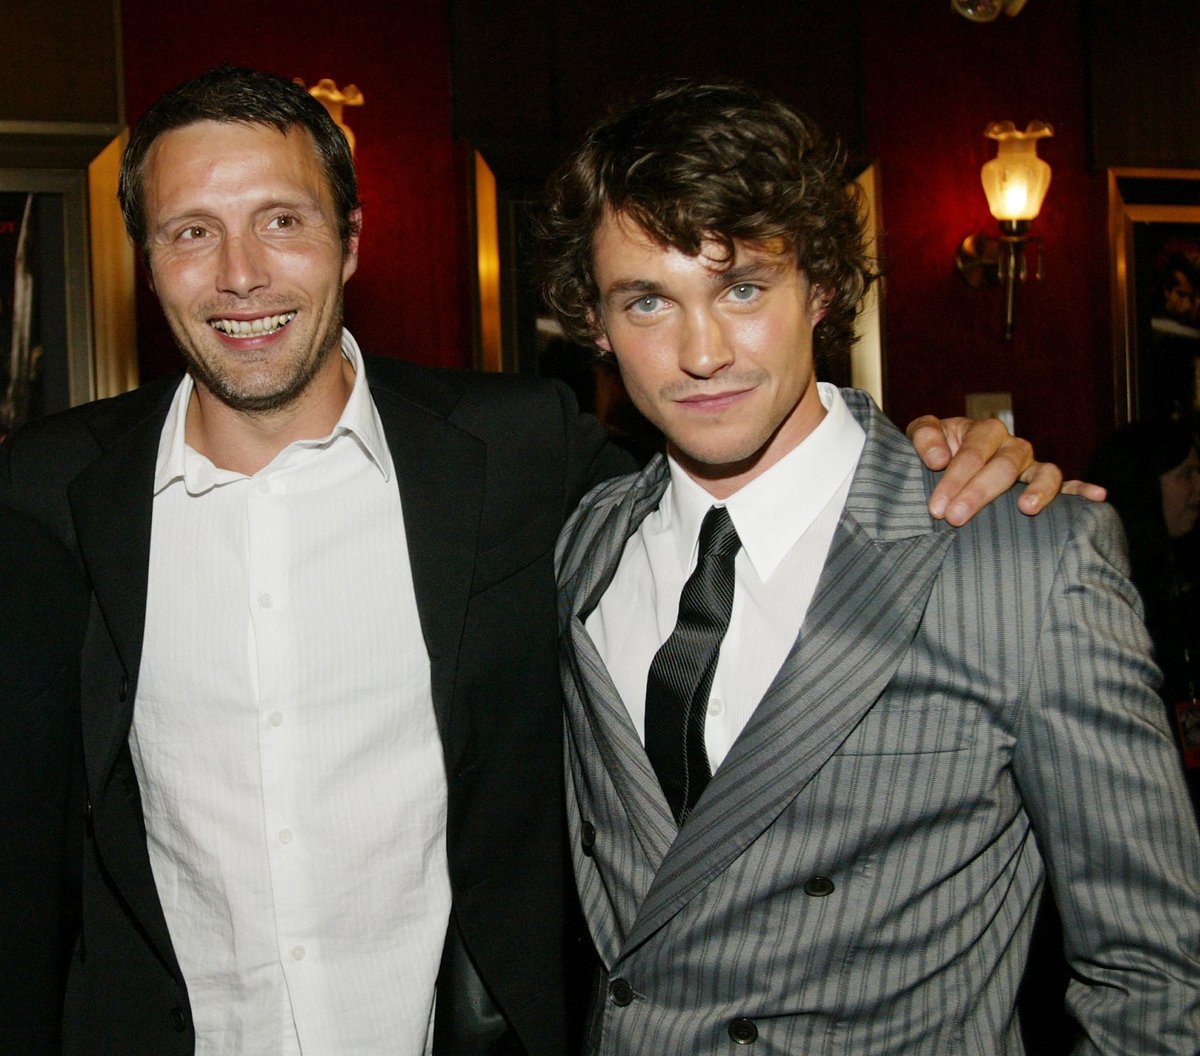 Hugh could never deny the sugar baby accusations after this picture was taken-